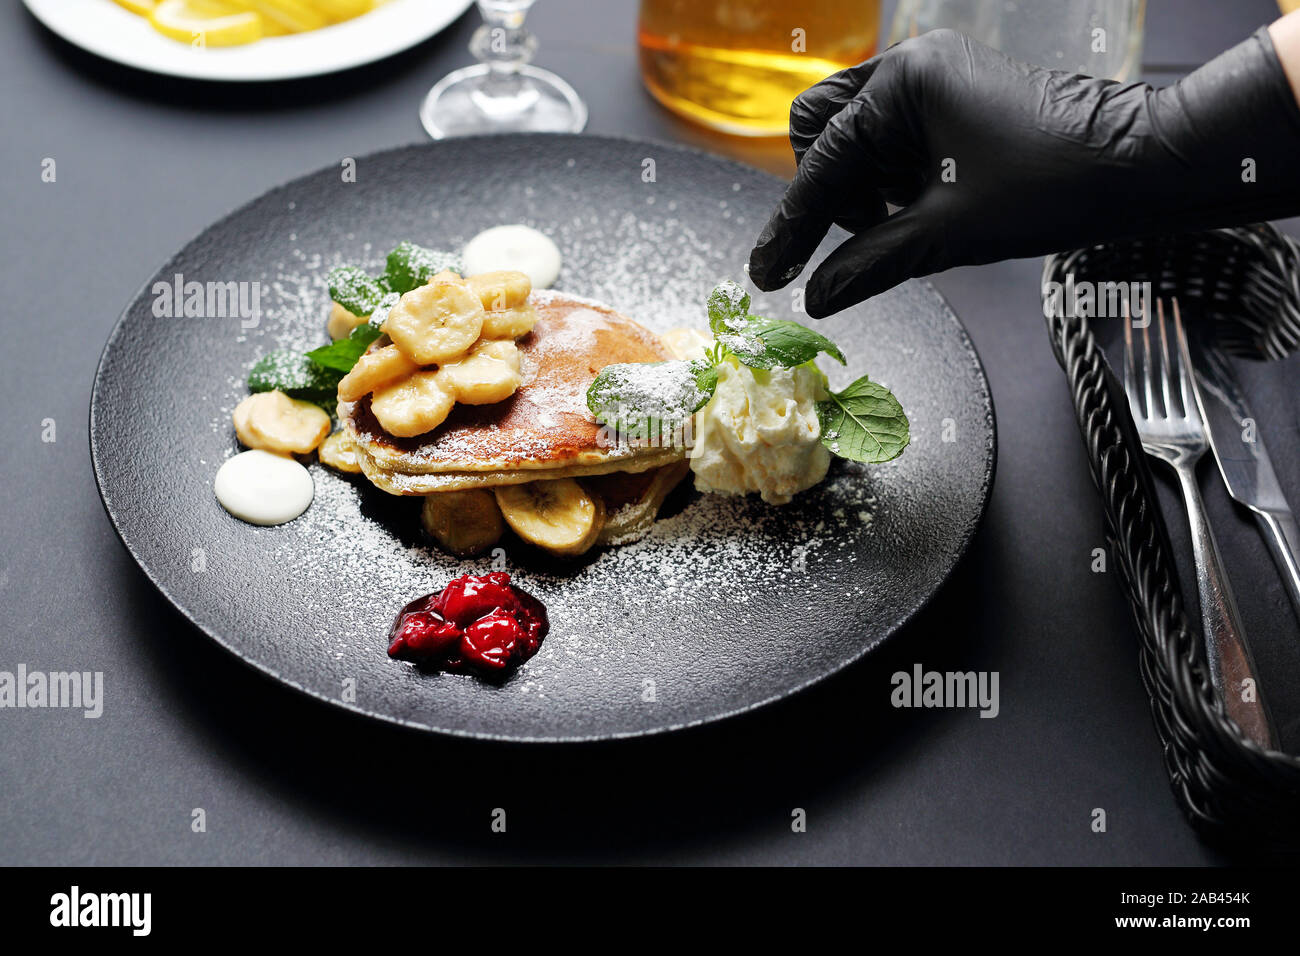 Cooking. The chef decorates the plate. Serving and decorating the dish. Stock Photo